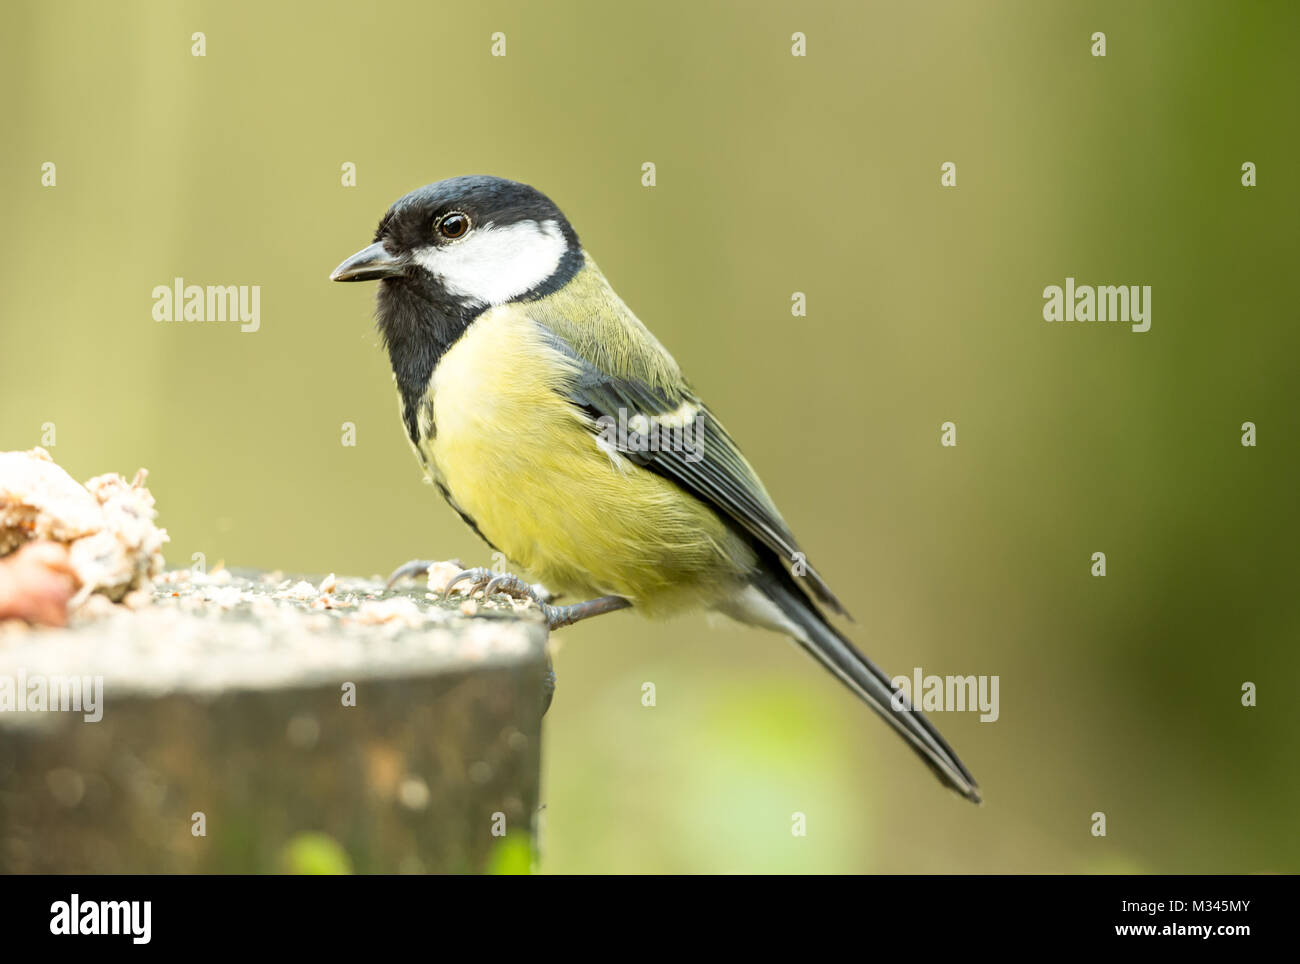 Great tit sat on a bird feeding table with peanuts and bird seed Stock Photo